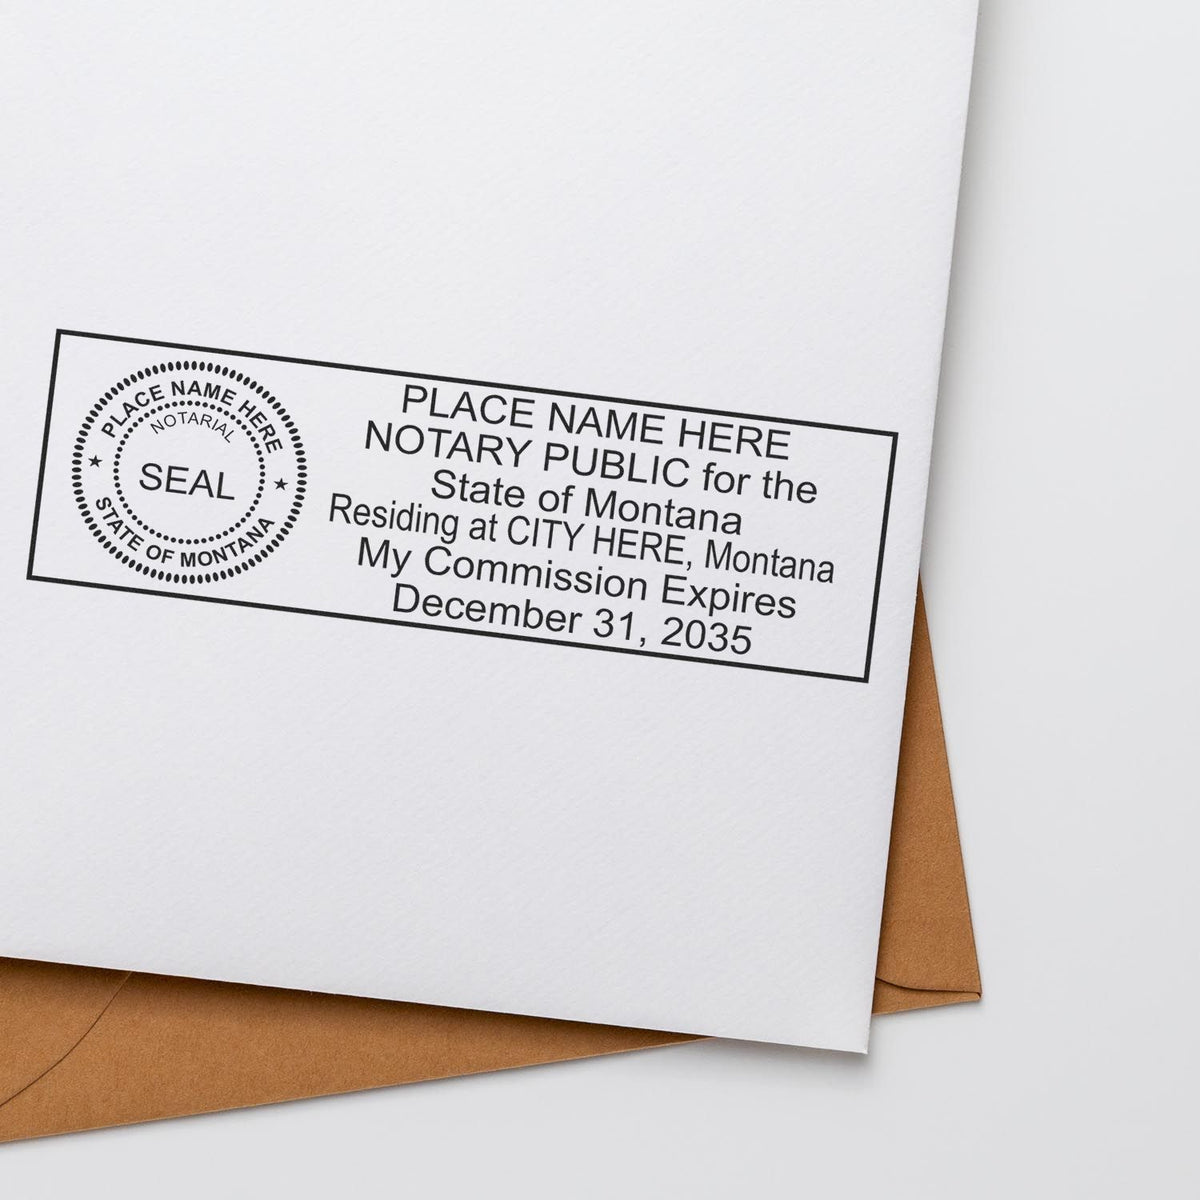 A lifestyle photo showing a stamped image of the MaxLight Premium Pre-Inked Montana State Seal Notarial Stamp on a piece of paper